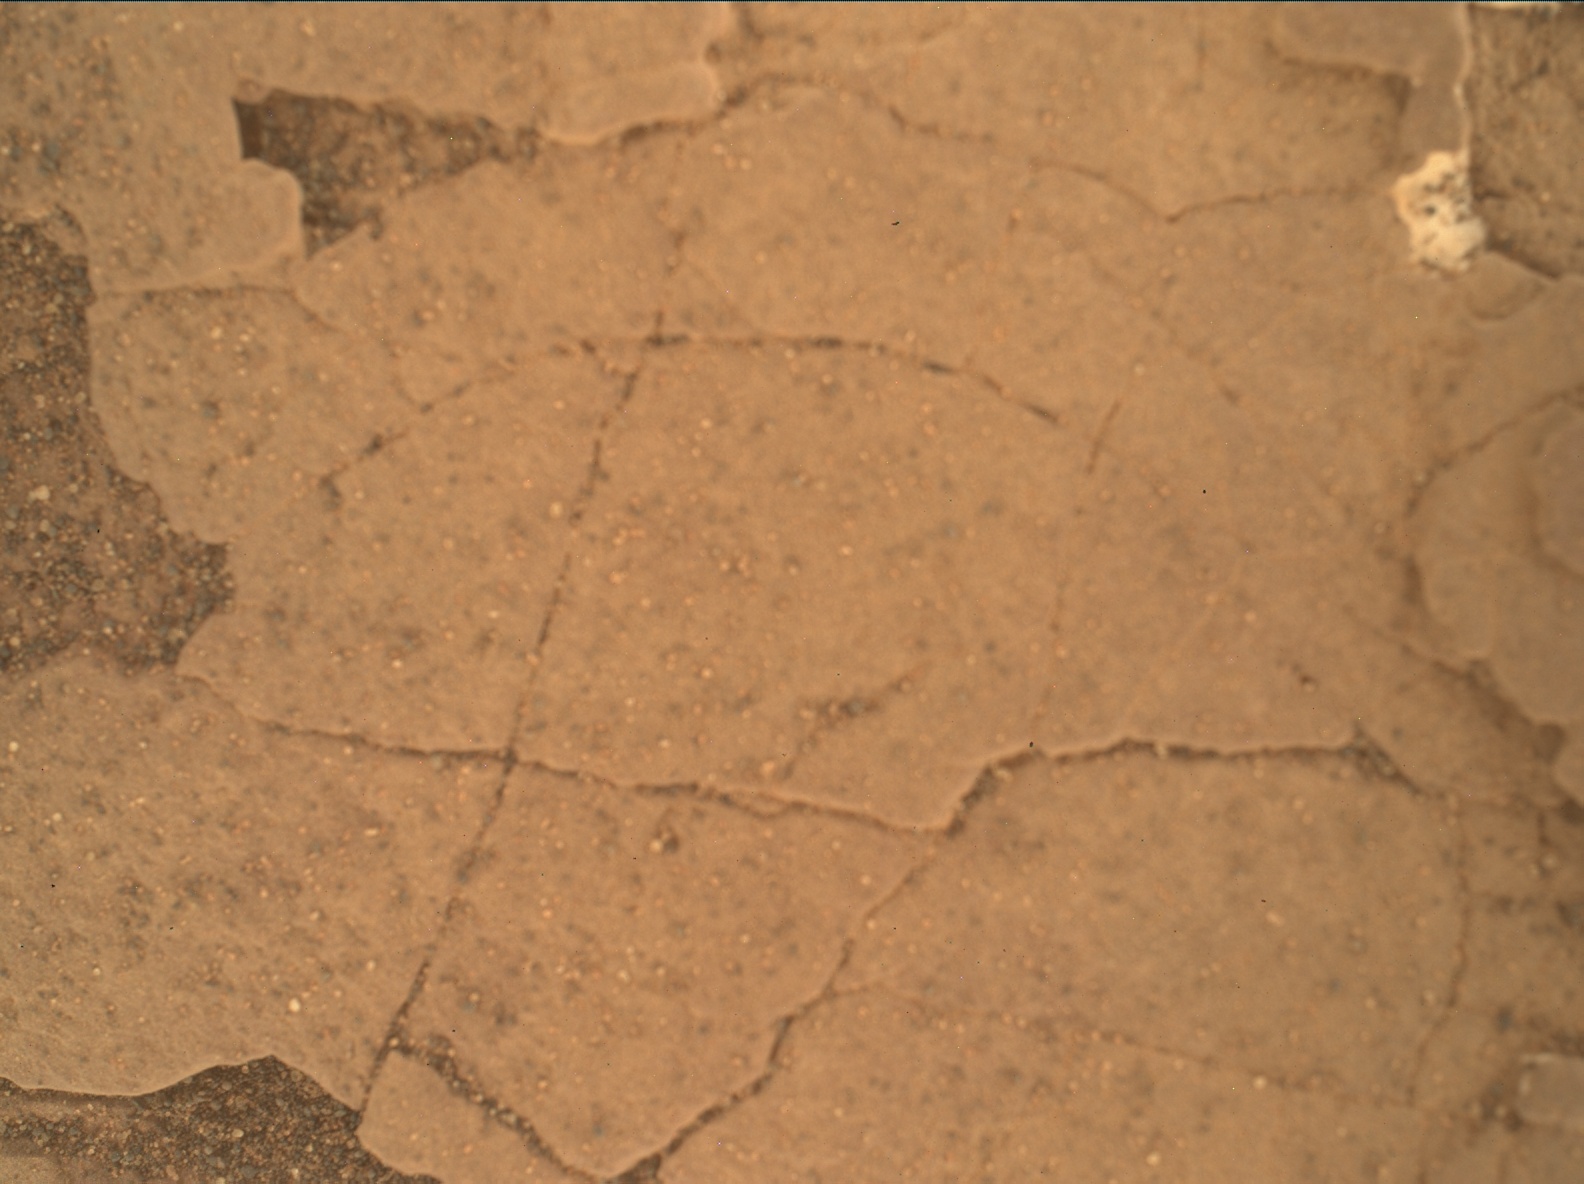 Nasa's Mars rover Curiosity acquired this image using its Mars Hand Lens Imager (MAHLI) on Sol 2463